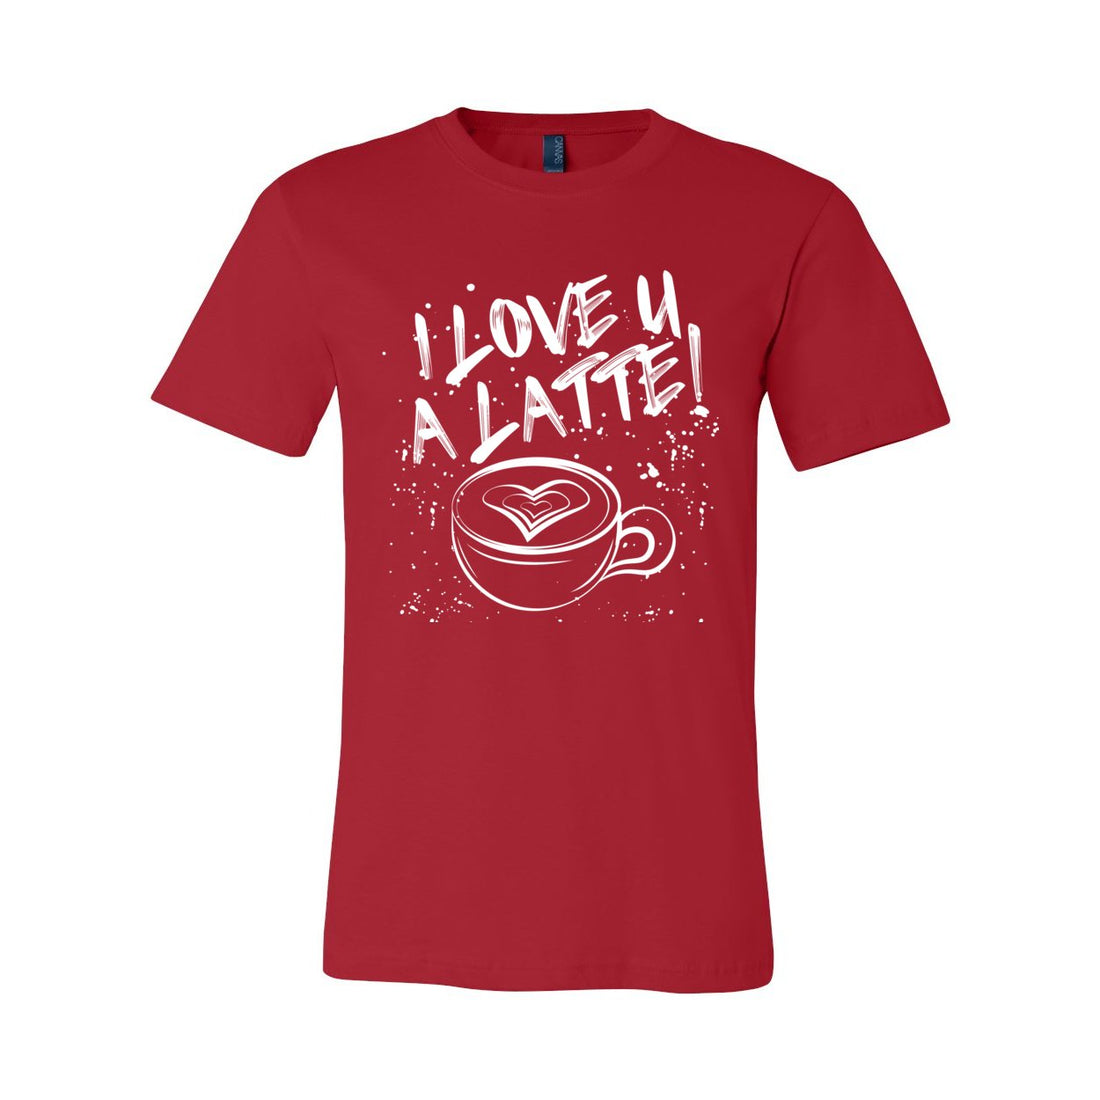 Love You A Latte Sleeve Jersey Tee - T-Shirts - Positively Sassy - Love You A Latte Sleeve Jersey Tee